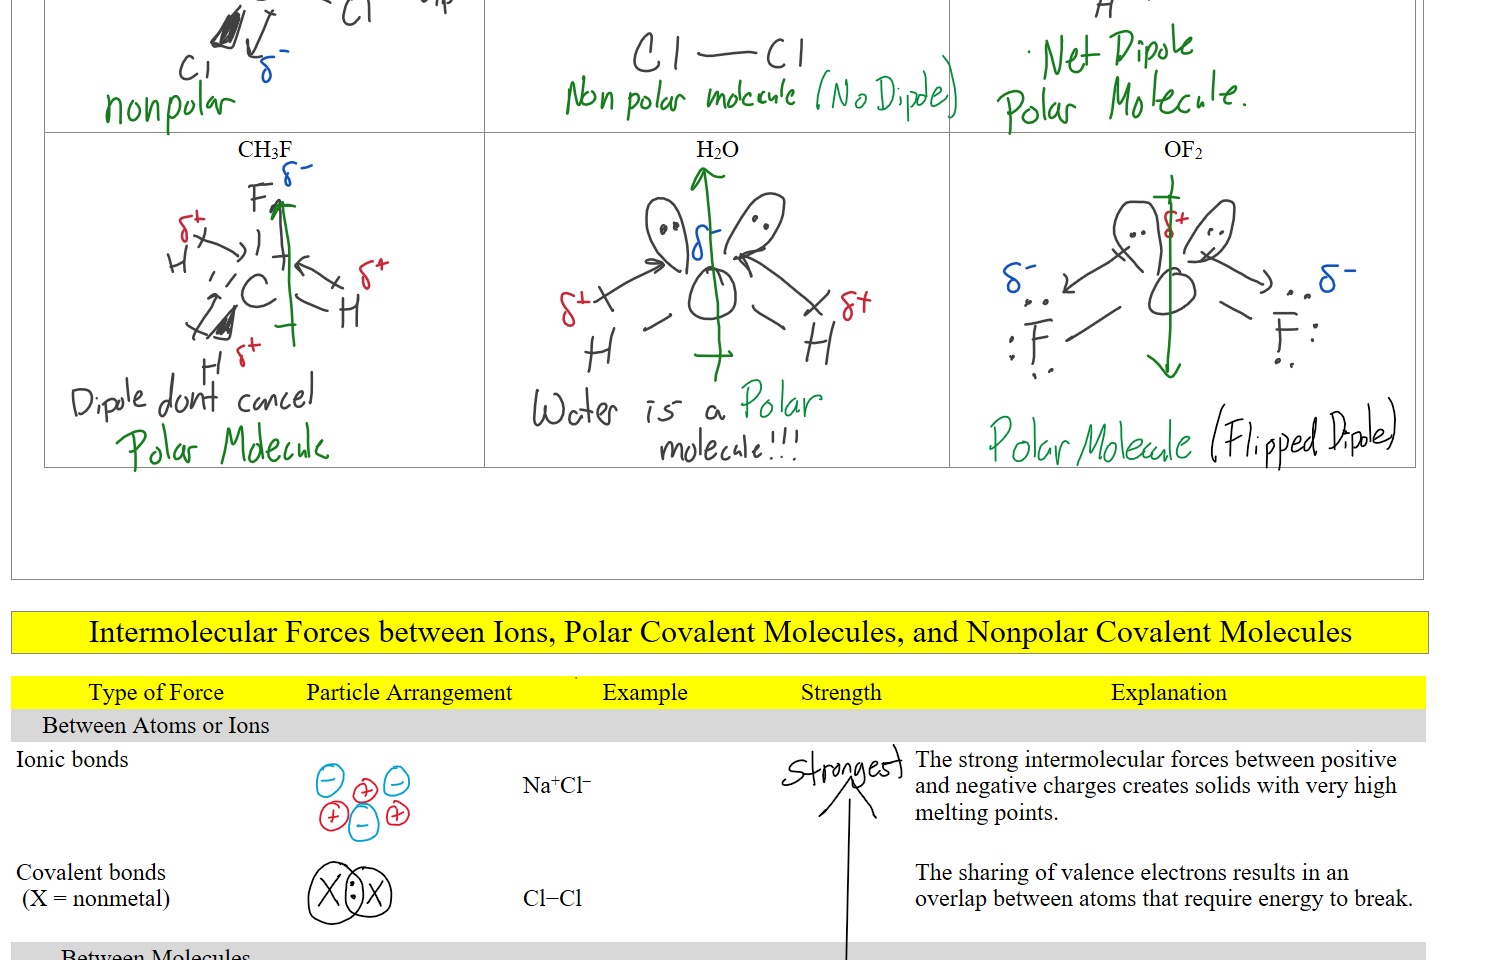 




CH3F













H2O 
OF2











Intermolecular Forces between Ions, Polar Covalent Molecules, and Nonpolar Covalent Molecules

Type of Force
Particle Arrangement
Example
Strength
Explanation
Between Atoms or Ions




Ionic bonds





Na+Cl–

The strong intermolecular forces between positive and negative charges creates solids with very high melting points.
Covalent bonds
 (X = nonmetal)



Cl−Cl

The sharing of valence electrons results in an overlap between atoms that require energy to break.
Between Molecules




Ink Drawings
Ink Drawings
Ink Drawings
Ink Drawings
Ink Drawings
Ink Drawings
Ink Drawings
Ink Drawings
Ink Drawings
Ink Drawings
Ink Drawings
Ink Drawings
Ink Drawings
Ink Drawings
Ink Drawings
Ink Drawings
Ink Drawings
Ink Drawings
Ink Drawings
Ink Drawings
Ink Drawings
Ink Drawings
Ink Drawings
Ink Drawings
Ink Drawings
Ink Drawings
Ink Drawings
Ink Drawings
Ink Drawings
Ink Drawings
Ink Drawings
Ink Drawings
Ink Drawings
Ink Drawings
Ink Drawings
Ink Drawings
Ink Drawings
Ink Drawings
Ink Drawings
Ink Drawings
Ink Drawings
Ink Drawings
Ink Drawings
Ink Drawings
Ink Drawings
Ink Drawings
Ink Drawings
Ink Drawings
Ink Drawings
Ink Drawings
Ink Drawings
Ink Drawings
Ink Drawings
Ink Drawings
Ink Drawings
Ink Drawings
Ink Drawings
Ink Drawings
Ink Drawings
Ink Drawings
Ink Drawings
Ink Drawings
Ink Drawings
Ink Drawings
Ink Drawings
Ink Drawings
Ink Drawings
Ink Drawings
Ink Drawings
Ink Drawings
Ink Drawings
Ink Drawings
Ink Drawings
Ink Drawings
Ink Drawings
Ink Drawings
Ink Drawings
Ink Drawings
Ink Drawings
Ink Drawings
Ink Drawings
Ink Drawings
Ink Drawings
Ink Drawings
Ink Drawings
Ink Drawings
Ink Drawings
Ink Drawings
Ink Drawings
Ink Drawings
Ink Drawings
Ink Drawings
Ink Drawings
Ink Drawings
Ink Drawings
Ink Drawings
Ink Drawings
Ink Drawings
Ink Drawings
Ink Drawings
Ink Drawings
Ink Drawings
Ink Drawings
Ink Drawings
Ink Drawings
Ink Drawings
Ink Drawings
Ink Drawings
Ink Drawings
Ink Drawings
Ink Drawings
Ink Drawings
Ink Drawings
Ink Drawings
Ink Drawings
Ink Drawings
Ink Drawings
Ink Drawings
Ink Drawings
Ink Drawings
Ink Drawings
Ink Drawings
Ink Drawings
Ink Drawings
Ink Drawings
Ink Drawings
Ink Drawings
Ink Drawings
Ink Drawings
Ink Drawings
Ink Drawings
Ink Drawings
Ink Drawings
Ink Drawings
Ink Drawings
Ink Drawings
Ink Drawings
Ink Drawings
Ink Drawings
Ink Drawings
Ink Drawings
Ink Drawings
Ink Drawings
Ink Drawings
Ink Drawings
Ink Drawings
Ink Drawings
Ink Drawings
Ink Drawings
Ink Drawings
Ink Drawings
Ink Drawings
Ink Drawings
Ink Drawings
Ink Drawings
Ink Drawings
Ink Drawings
Ink Drawings
Ink Drawings
Ink Drawings
Ink Drawings
Ink Drawings
Ink Drawings
Ink Drawings
Ink Drawings
Ink Drawings
Ink Drawings
Ink Drawings
Ink Drawings
Ink Drawings
Ink Drawings
Ink Drawings
Ink Drawings
Ink Drawings
Ink Drawings
Ink Drawings
Ink Drawings
Ink Drawings
Ink Drawings
Ink Drawings
Ink Drawings
Ink Drawings
Ink Drawings
Ink Drawings
Ink Drawings
Ink Drawings
Ink Drawings
Ink Drawings
Ink Drawings
Ink Drawings
Ink Drawings
Ink Drawings
Ink Drawings
Ink Drawings
Ink Drawings
Ink Drawings
Ink Drawings
Ink Drawings
Ink Drawings
Ink Drawings
Ink Drawings
Ink Drawings
Ink Drawings
Ink Drawings
Ink Drawings
Ink Drawings
Ink Drawings
Ink Drawings
Ink Drawings
Ink Drawings
Ink Drawings
Ink Drawings
Ink Drawings
Ink Drawings
Ink Drawings
Ink Drawings
Ink Drawings
Ink Drawings
Ink Drawings
Ink Drawings
Ink Drawings
Ink Drawings
Ink Drawings
Ink Drawings
Ink Drawings
Ink Drawings
Ink Drawings
Ink Drawings
Ink Drawings
Ink Drawings
Ink Drawings
Ink Drawings
Ink Drawings
Ink Drawings
Ink Drawings
Ink Drawings
Ink Drawings
Ink Drawings
Ink Drawings
Ink Drawings
Ink Drawings
Ink Drawings
Ink Drawings
Ink Drawings
Ink Drawings
Ink Drawings
Ink Drawings
Ink Drawings
Ink Drawings
Ink Drawings
Ink Drawings
Ink Drawings
Ink Drawings
Ink Drawings
Ink Drawings
Ink Drawings
Ink Drawings
Ink Drawings
Ink Drawings
Ink Drawings
Ink Drawings
Ink Drawings
Ink Drawings
Ink Drawings
Ink Drawings
Ink Drawings
Ink Drawings
Ink Drawings
Ink Drawings
Ink Drawings
Ink Drawings
Ink Drawings
Ink Drawings
Ink Drawings
Ink Drawings
Ink Drawings
Ink Drawings
Ink Drawings
Ink Drawings
Ink Drawings
Ink Drawings
Ink Drawings
Ink Drawings
Ink Drawings
Ink Drawings
Ink Drawings
Ink Drawings
Ink Drawings
Ink Drawings
Ink Drawings
Ink Drawings
Ink Drawings
Ink Drawings
Ink Drawings
Ink Drawings
Ink Drawings
Ink Drawings
Ink Drawings
Ink Drawings
Ink Drawings
Ink Drawings
Ink Drawings
Ink Drawings
Ink Drawings
Ink Drawings
Ink Drawings
Ink Drawings
Ink Drawings
Ink Drawings
Ink Drawings
Ink Drawings
Ink Drawings
Ink Drawings
Ink Drawings
Ink Drawings
Ink Drawings
Ink Drawings
Ink Drawings
Ink Drawings
Ink Drawings
Ink Drawings
Ink Drawings
Ink Drawings
Ink Drawings
Ink Drawings
Ink Drawings
Ink Drawings
Ink Drawings
Ink Drawings
Ink Drawings
Ink Drawings
Ink Drawings
Ink Drawings
Ink Drawings
Ink Drawings
Ink Drawings
Ink Drawings
Ink Drawings
Ink Drawings
Ink Drawings
Ink Drawings
Ink Drawings
Ink Drawings
Ink Drawings
Ink Drawings
Ink Drawings
Ink Drawings
Ink Drawings
Ink Drawings
Ink Drawings
Ink Drawings
Ink Drawings
